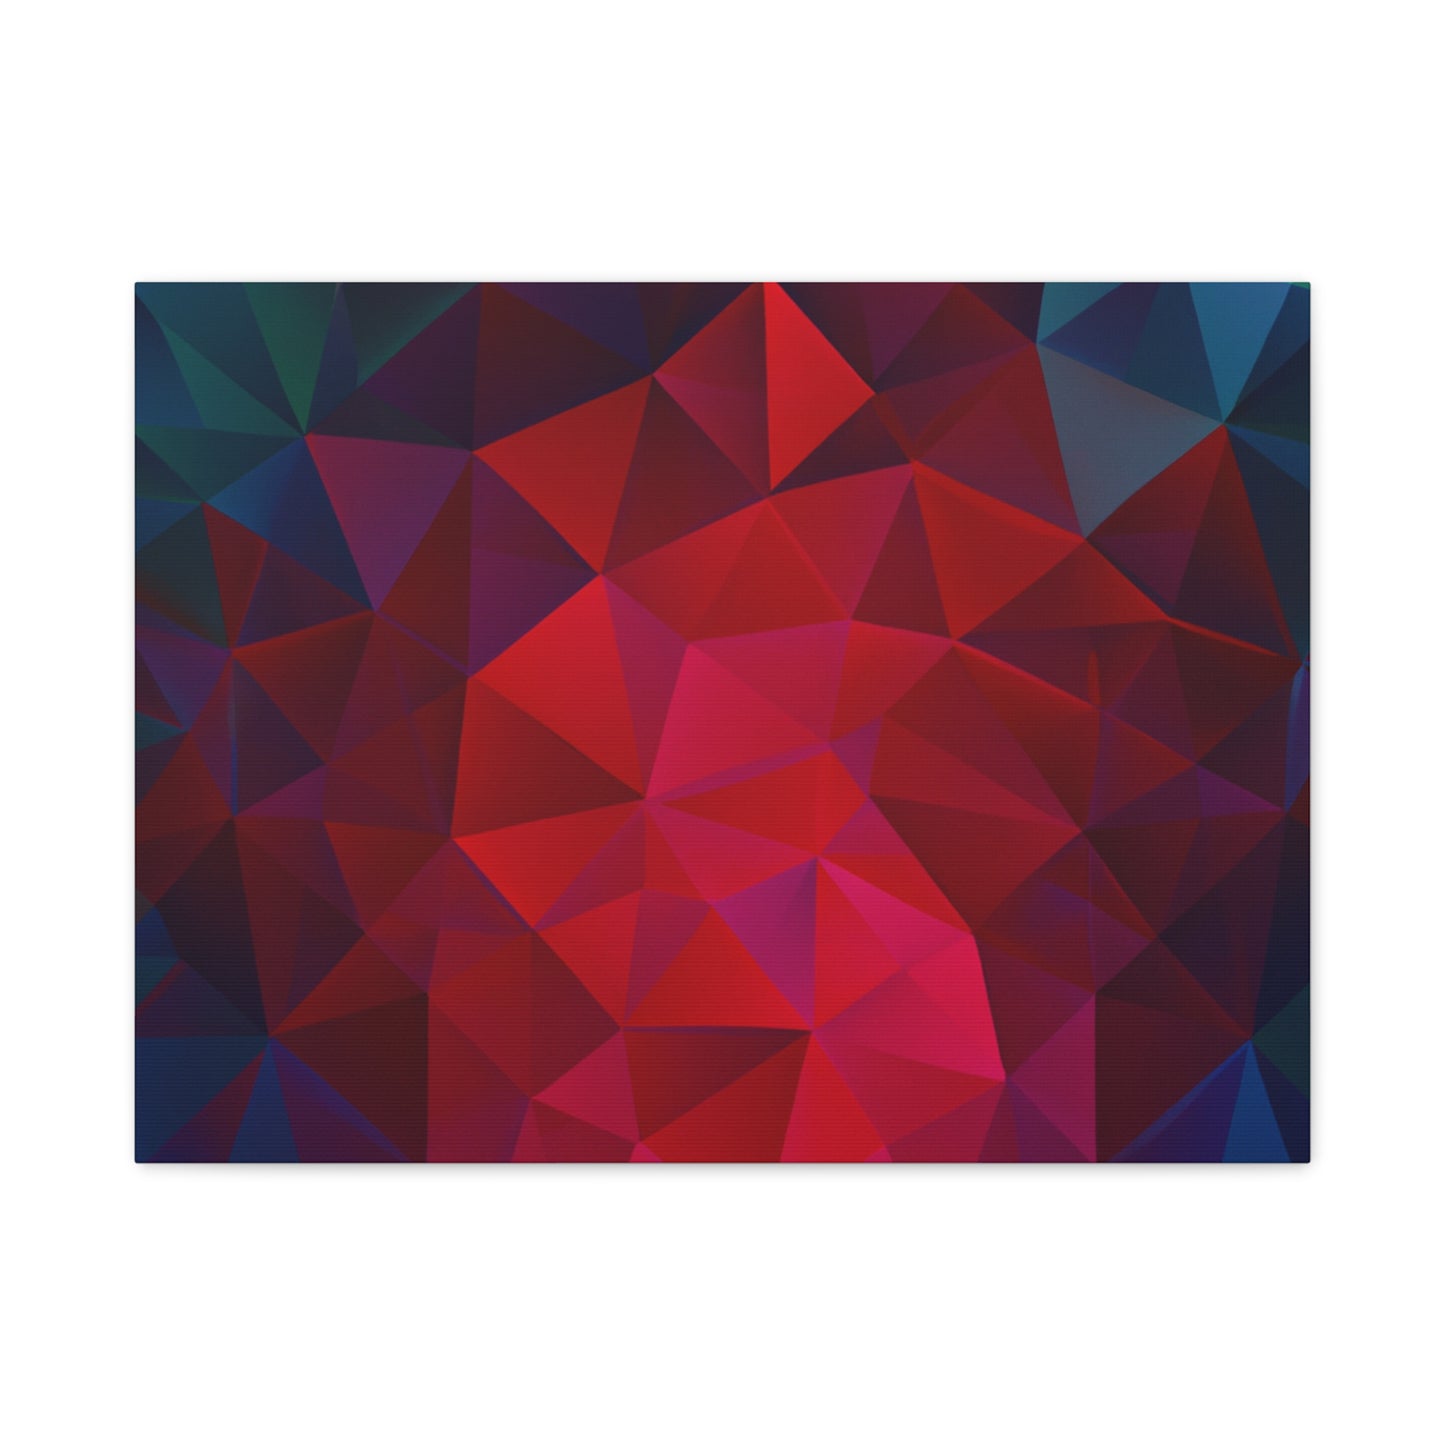 Abstract Digital Art Low-poly Style Decor Hanging Wall Painting Canvas Wall Art Print